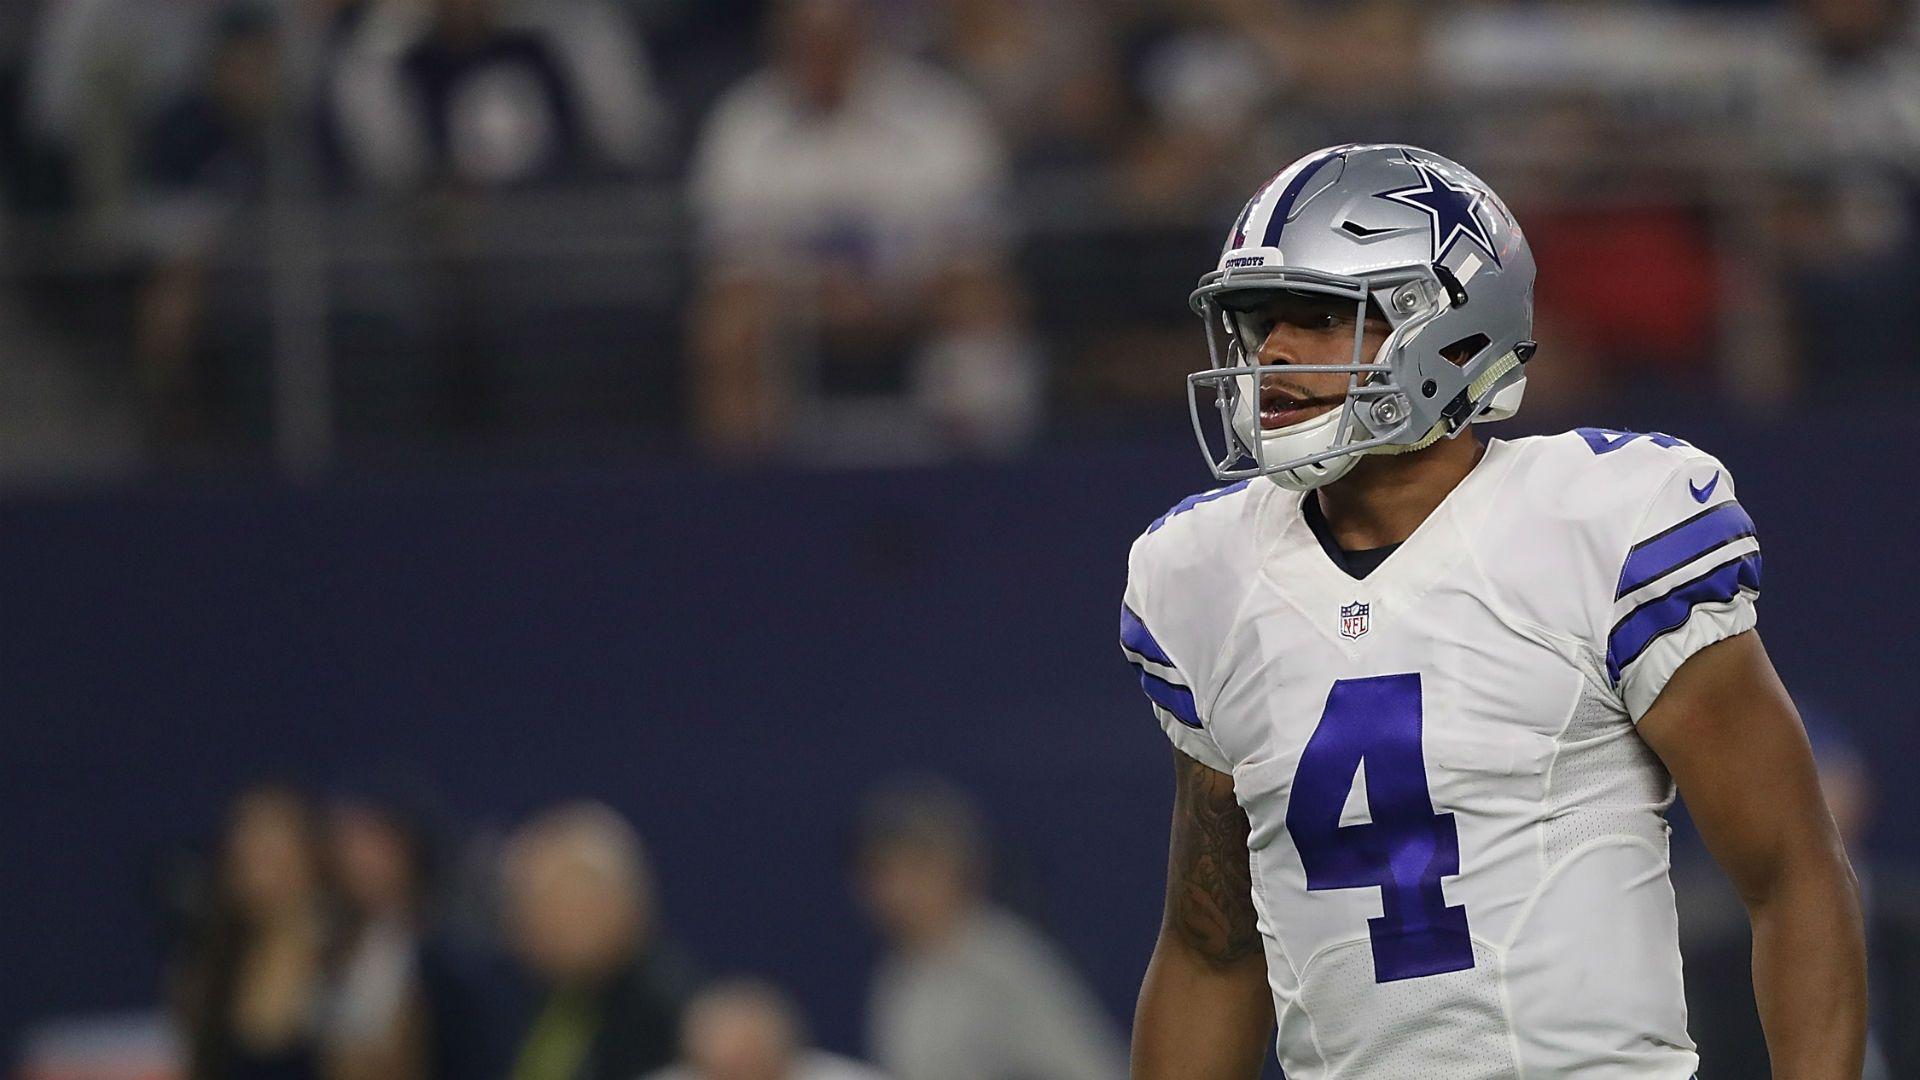 Jerry Jones seems to be changing his mind about Cowboys QB. NFL